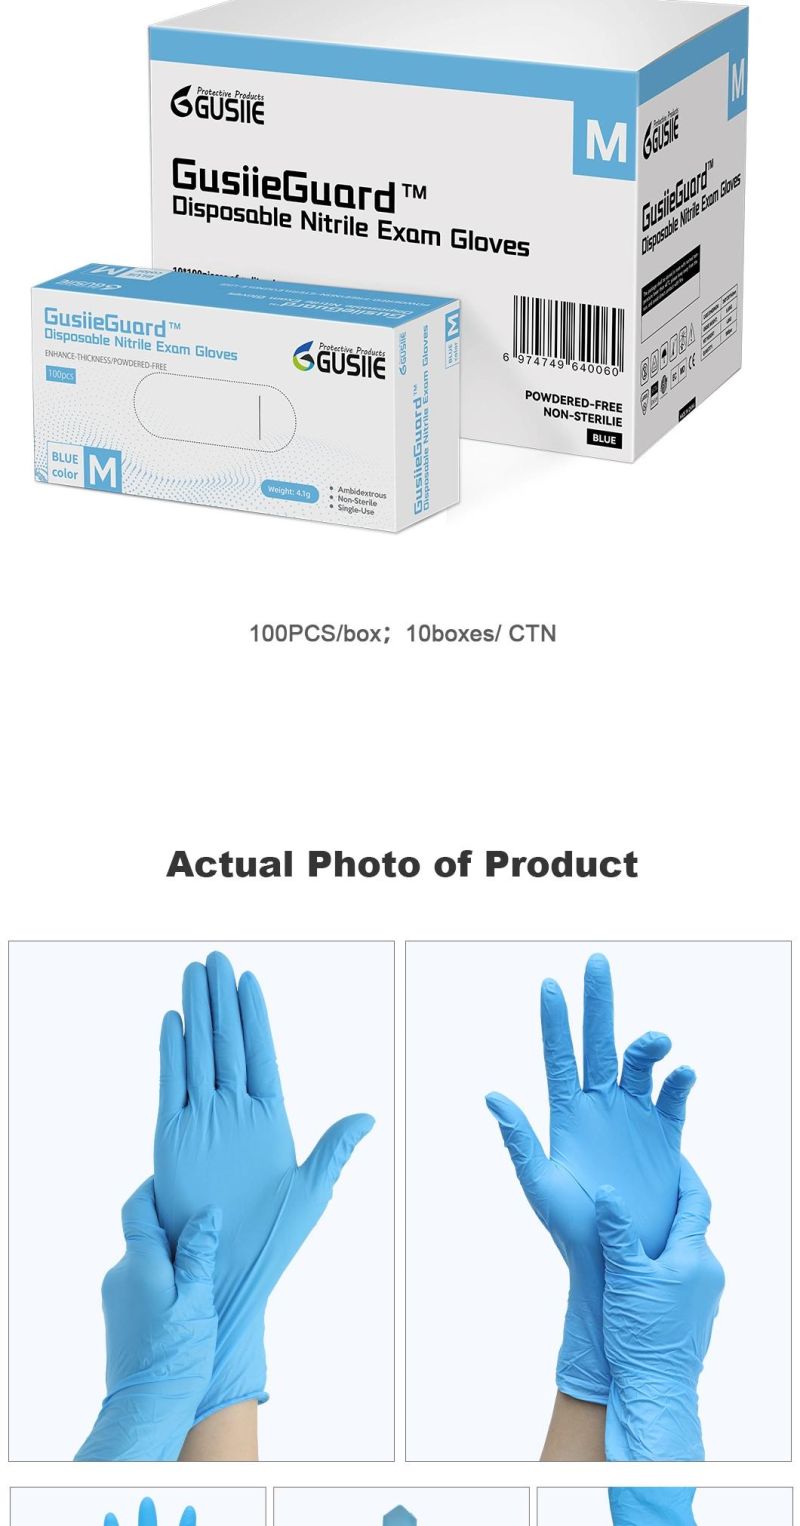 One-Time Medical Examination 100 Large-Size Gloves in a Box of Blue and Black Nitrile Gloves